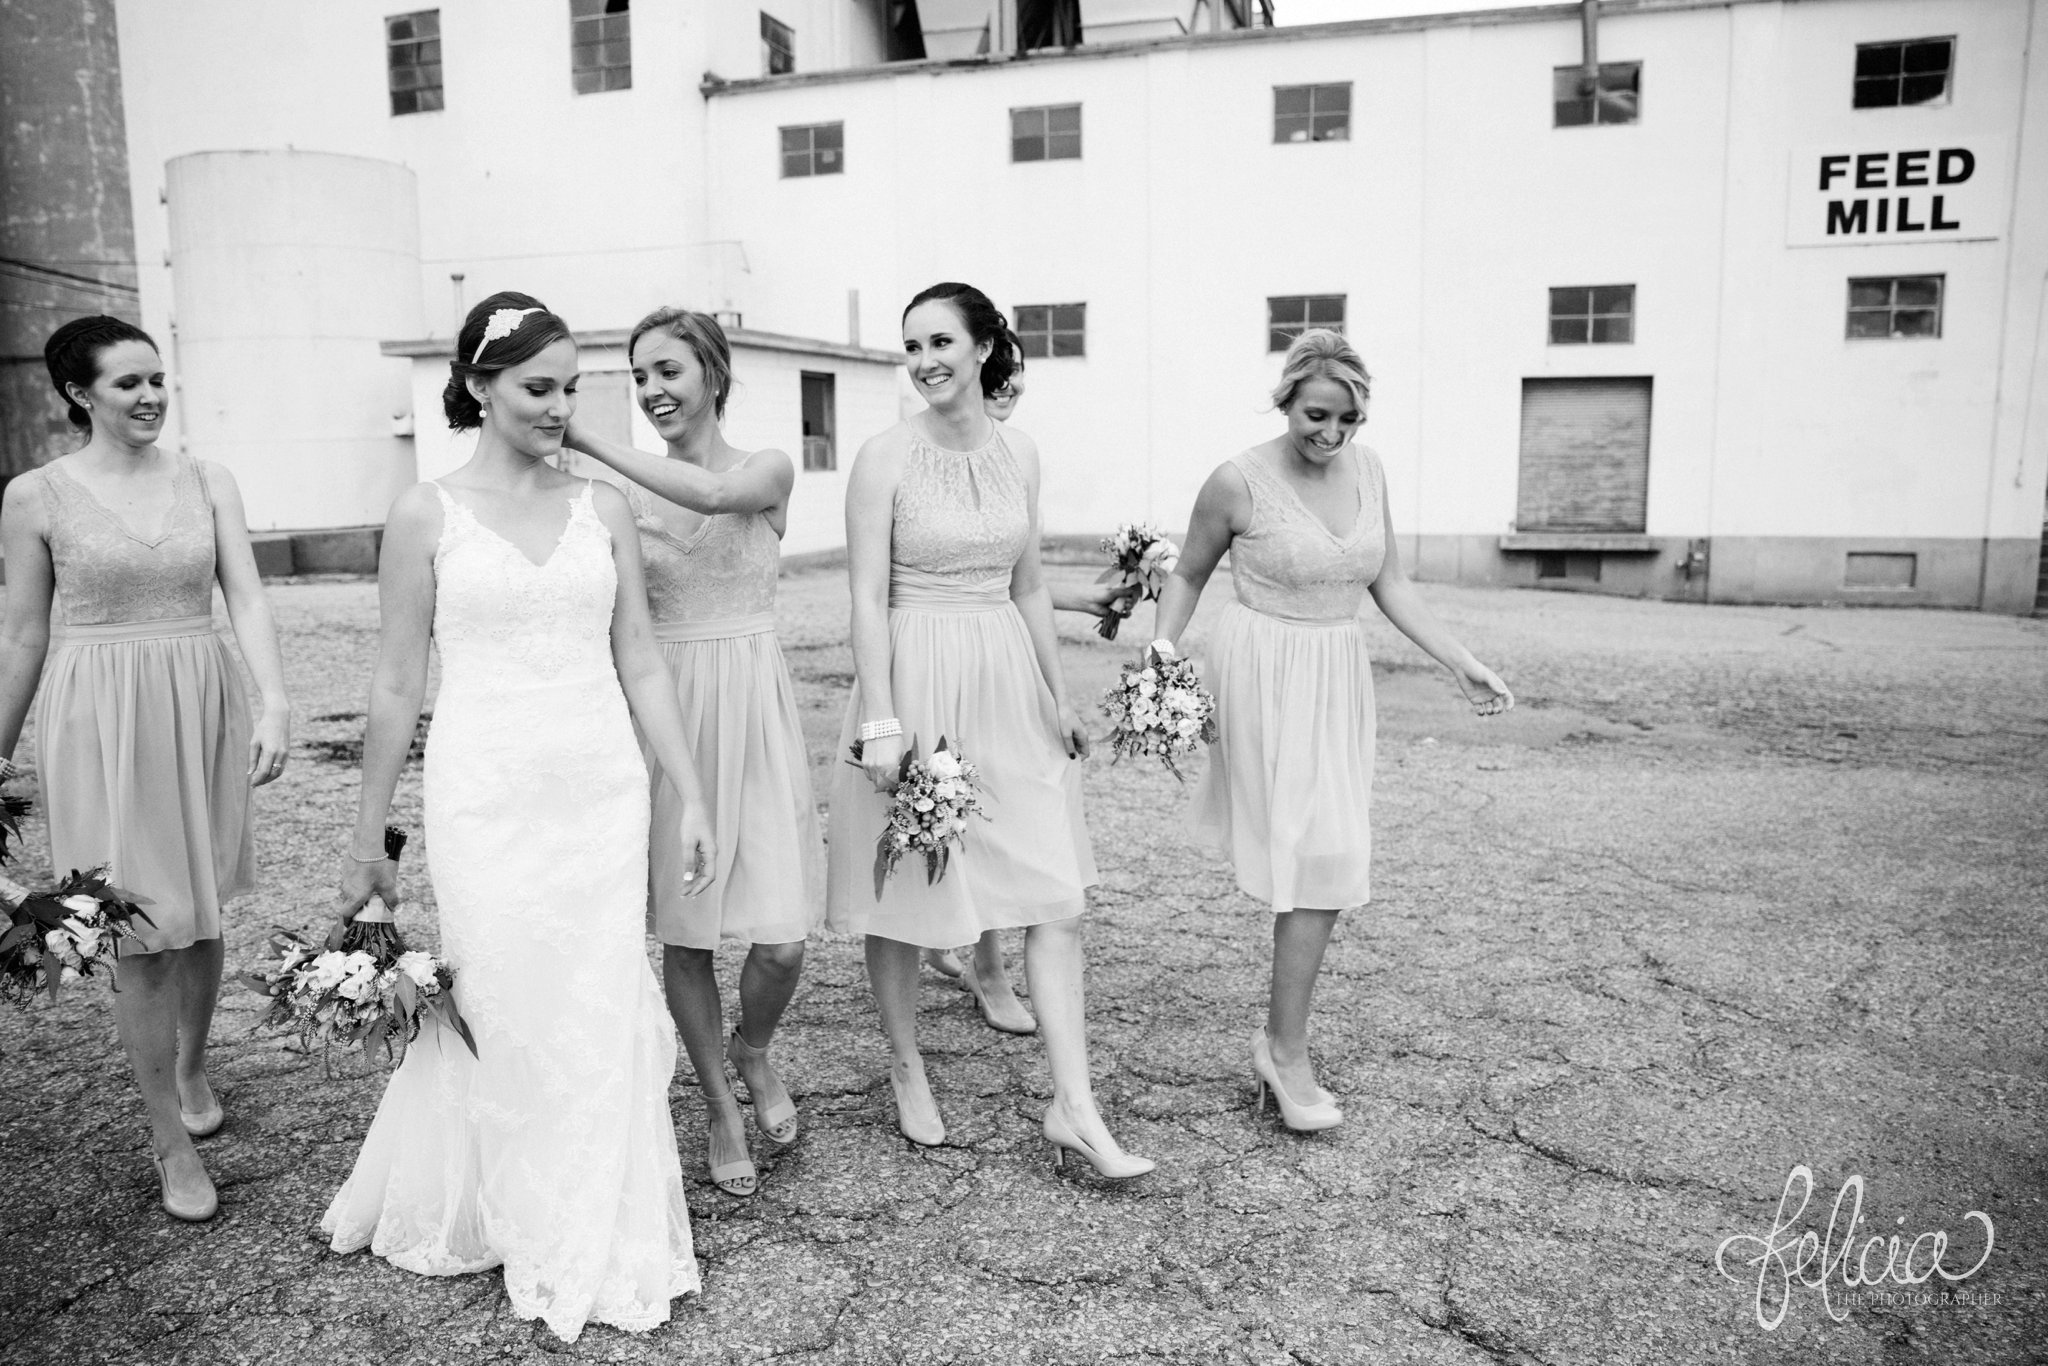 Black and White | Wedding | Wedding Photography | Wedding Photos | Travel Photographer | Images by feliciathephotographer.com | Kansas | Rustic Background | Agricultural | Industrial | Bridesmaid Portrait | Bride with Bridesmaids | Candid | Dress Fix | Casual | Fun 